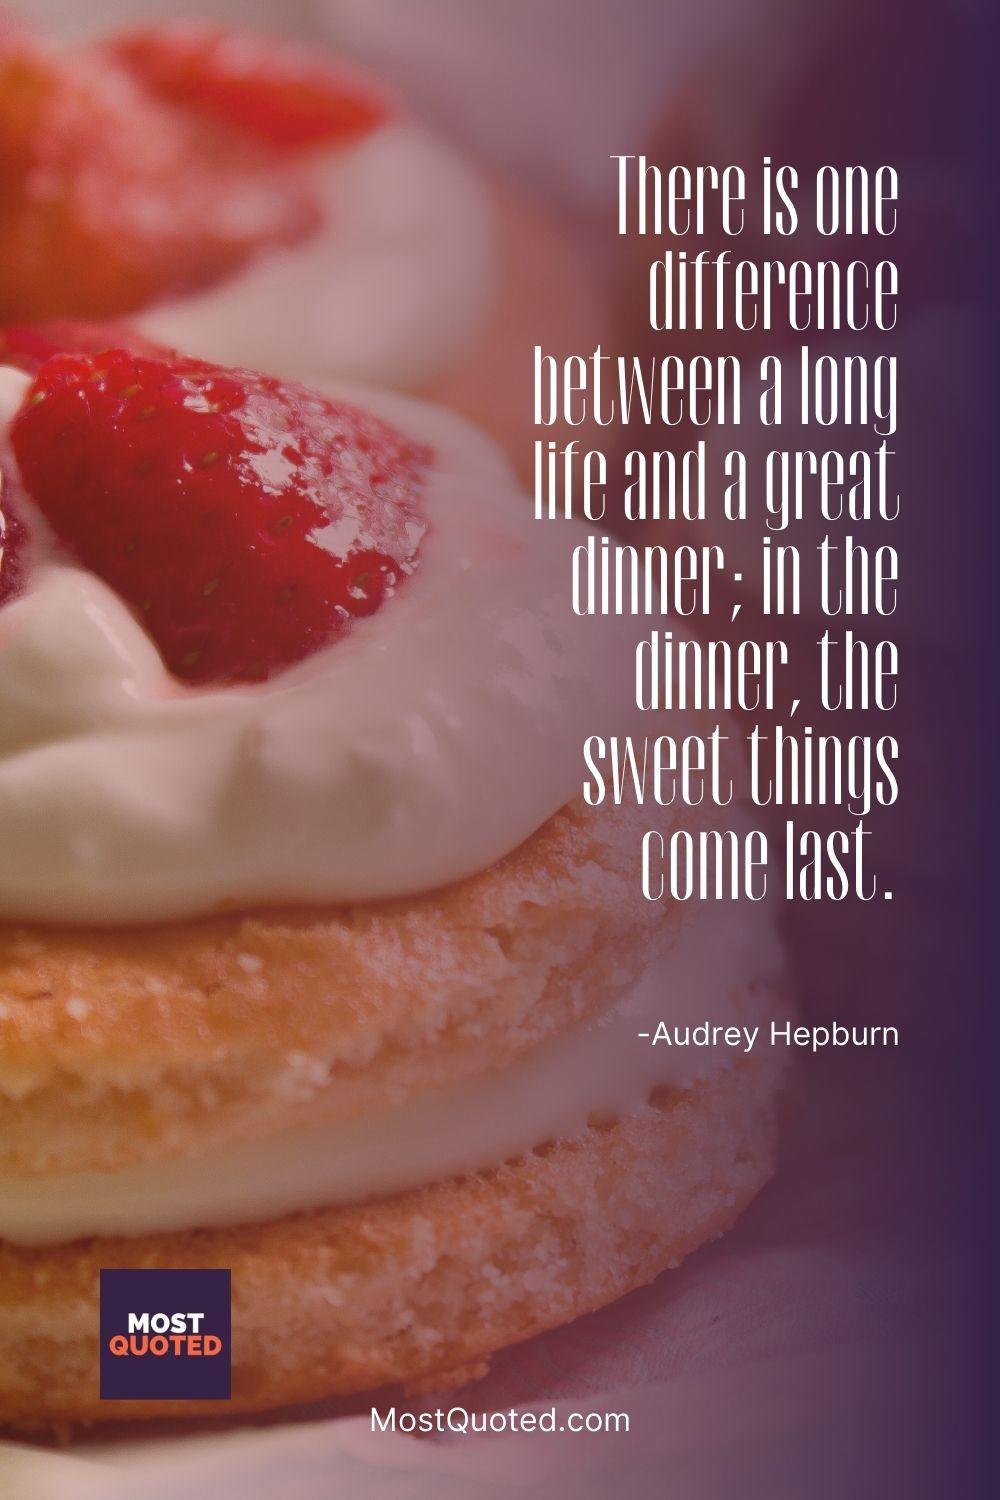 There is one difference between a long life and a great dinner; in the dinner, the sweet things come last. - Audrey Hepburn